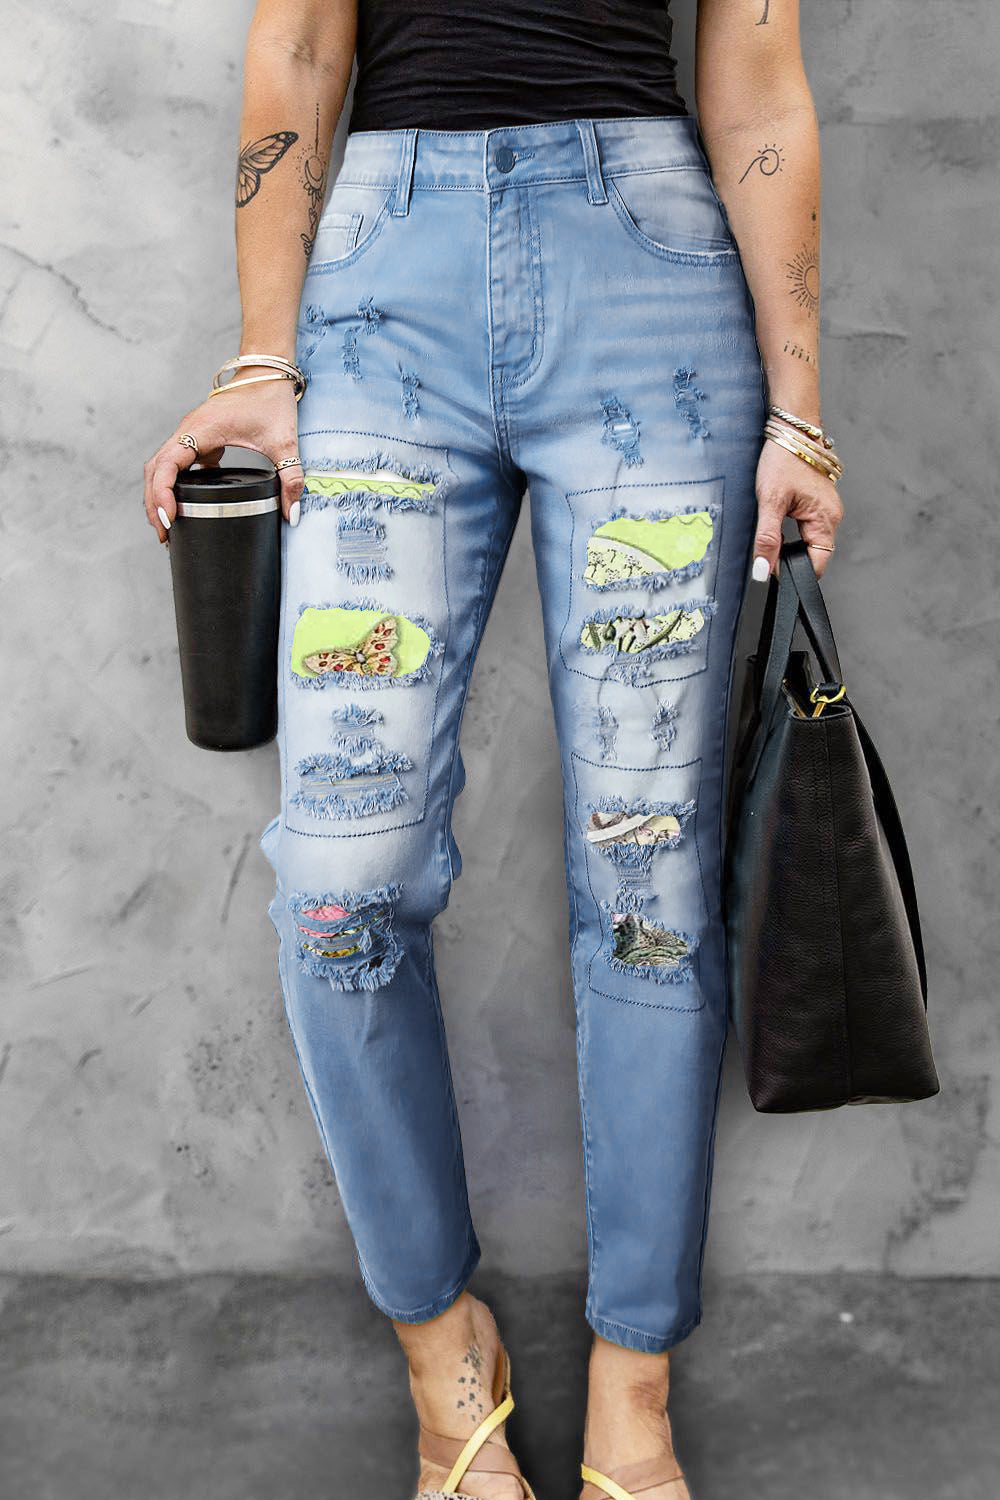 Retro Oil Painting Style Egg Bunny Frame Ripped Denim Jeans